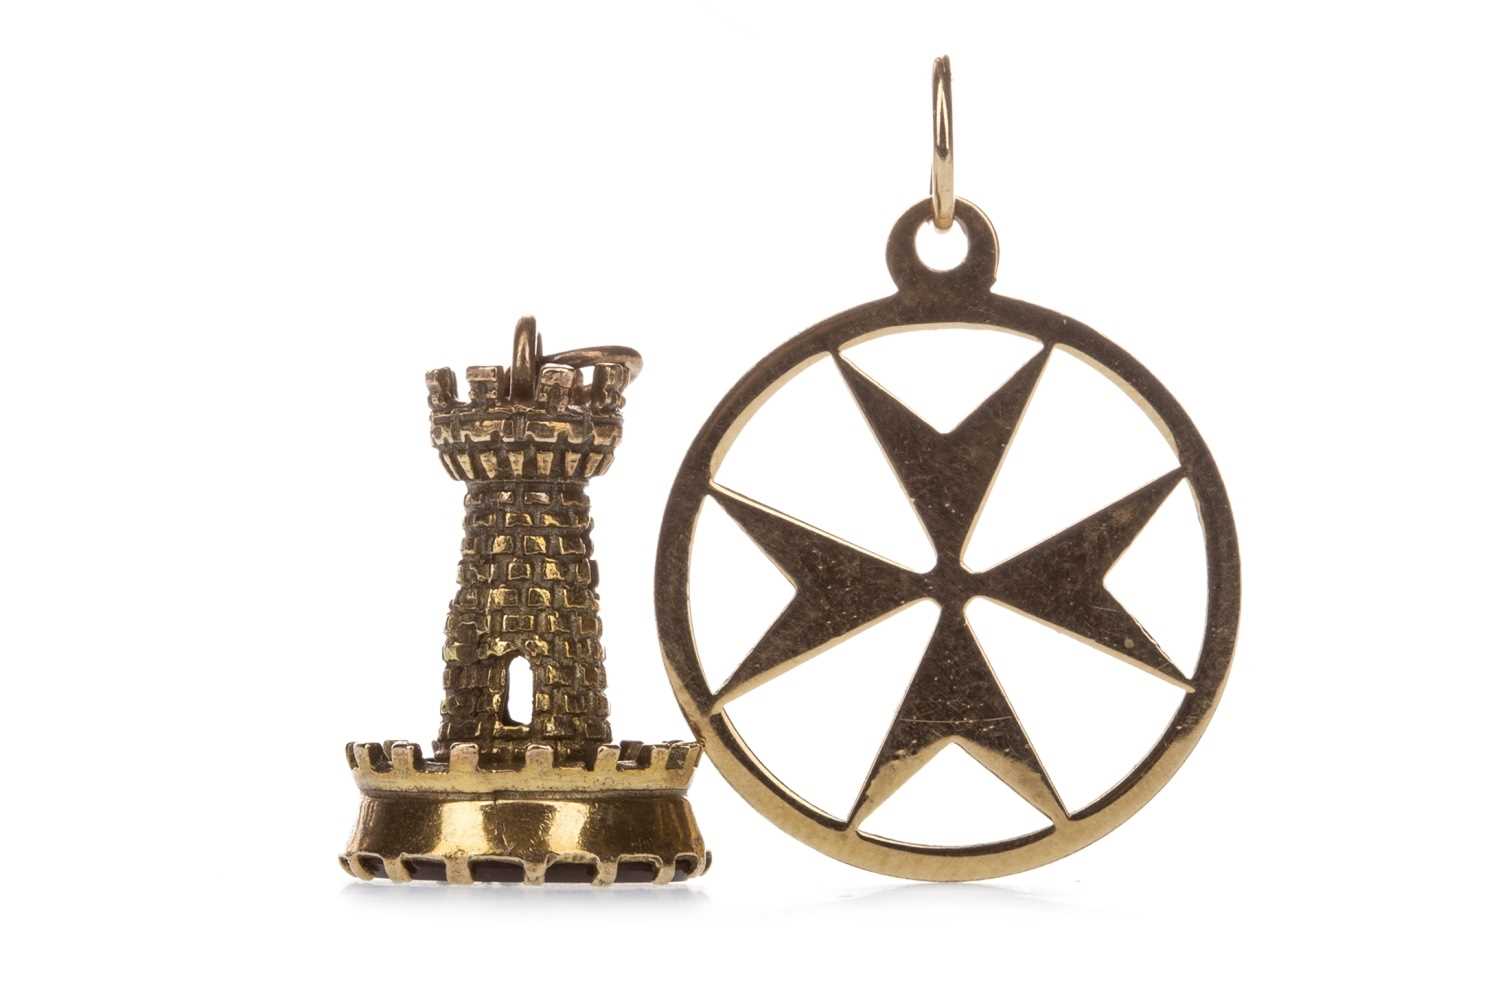 Lot 333 - A MALTESE CROSS PENDANT AND A SEAL FOB